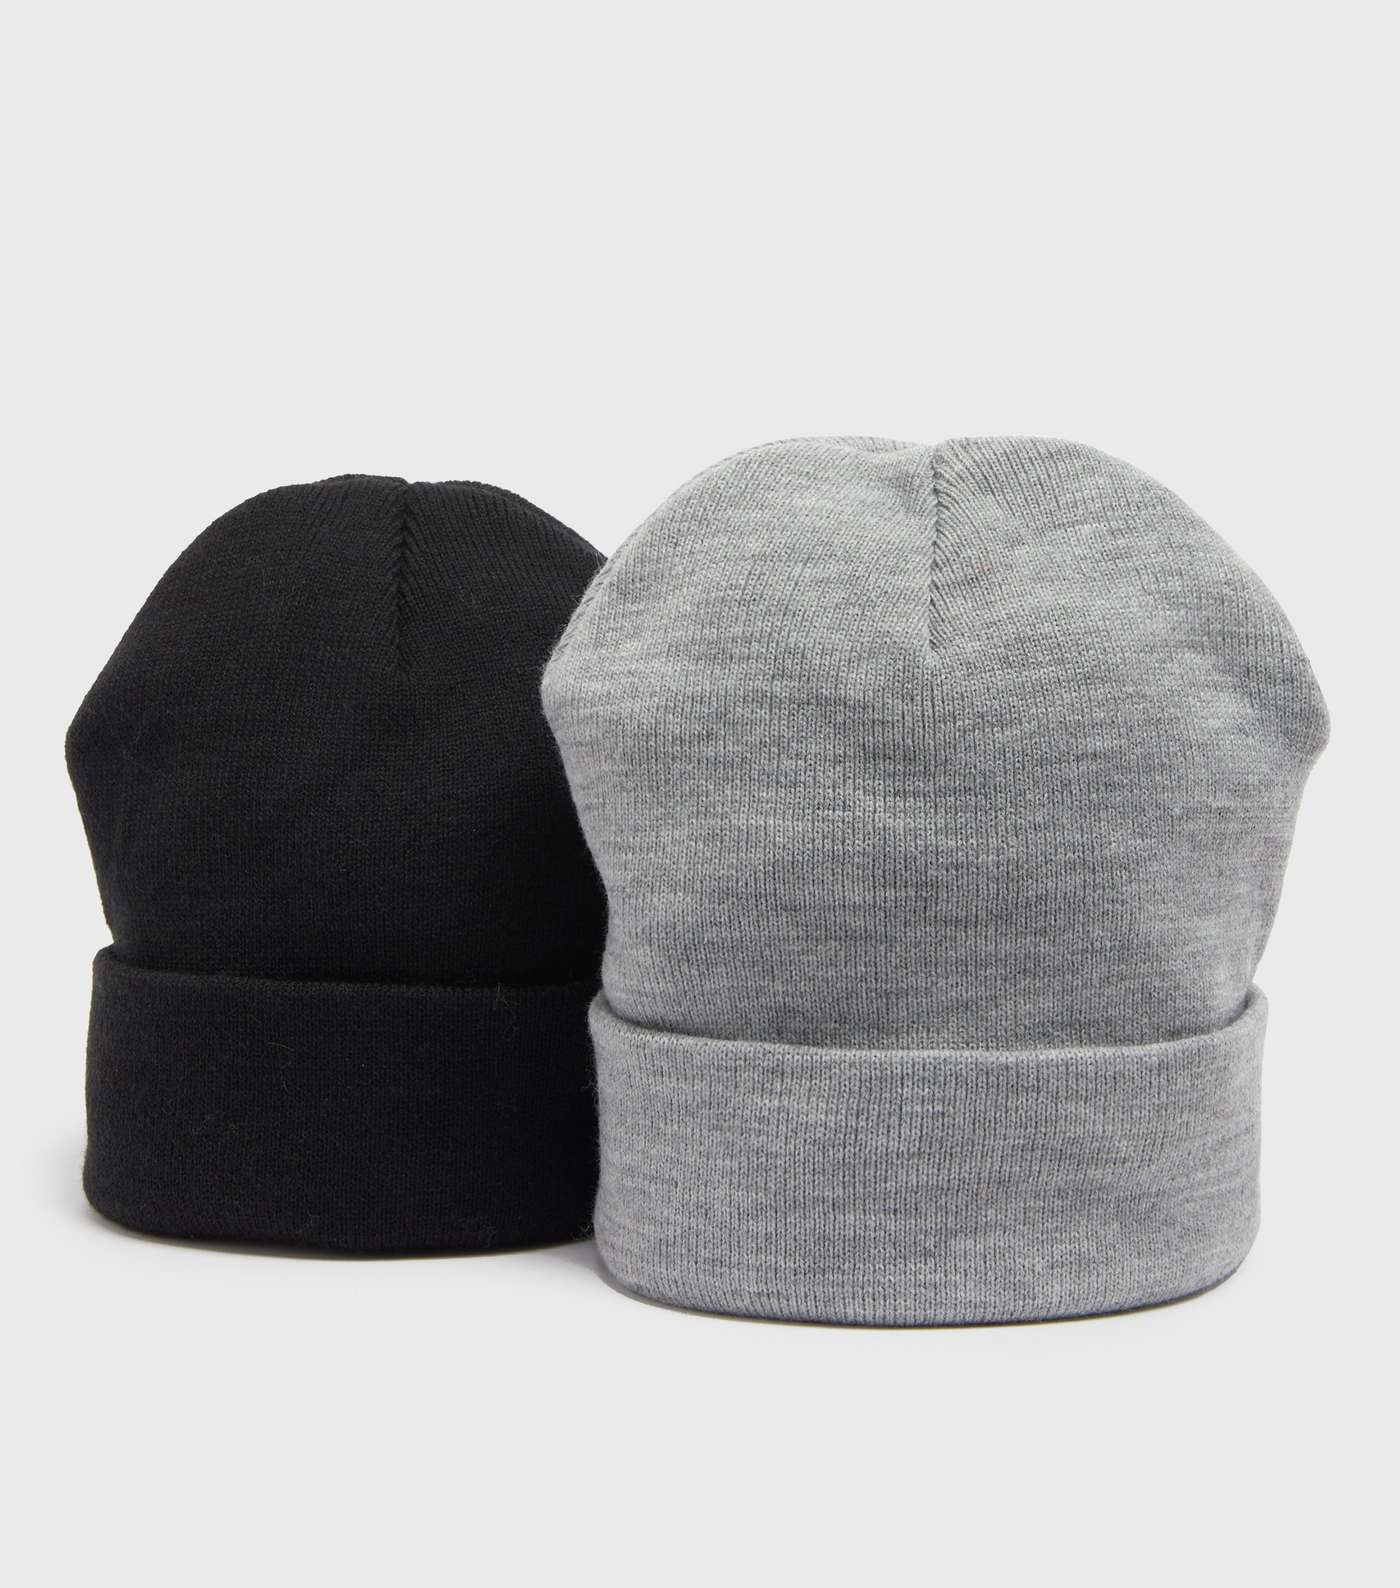 2 Pack Black and Grey Knit Beanies Image 2